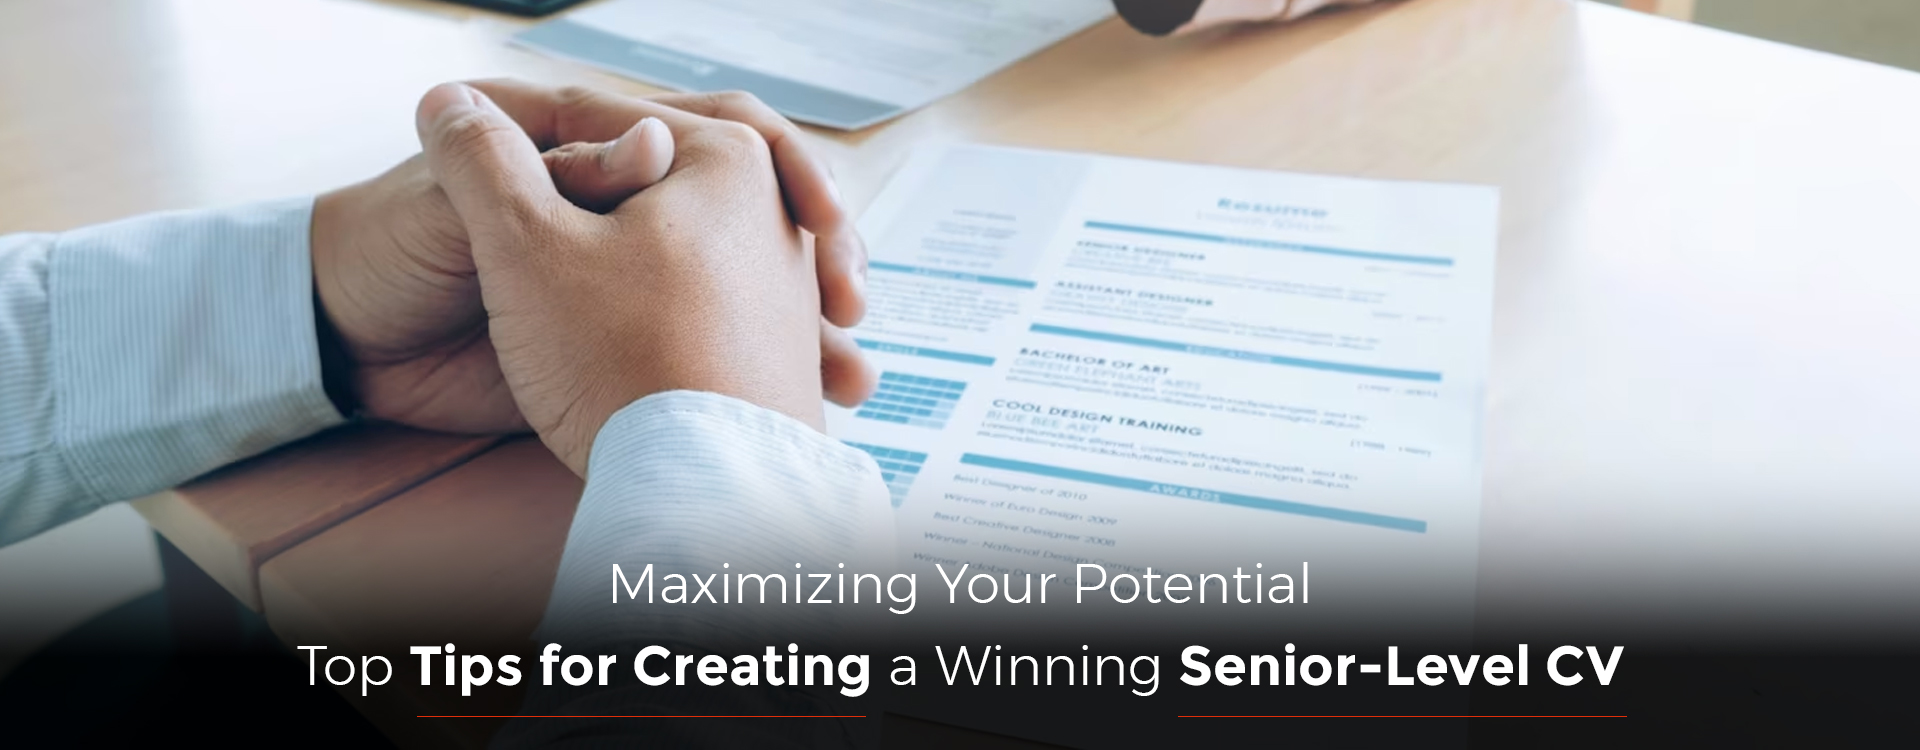 Maximizing Your Potential: Top Tips for Creating a Winning Senior-Level CV